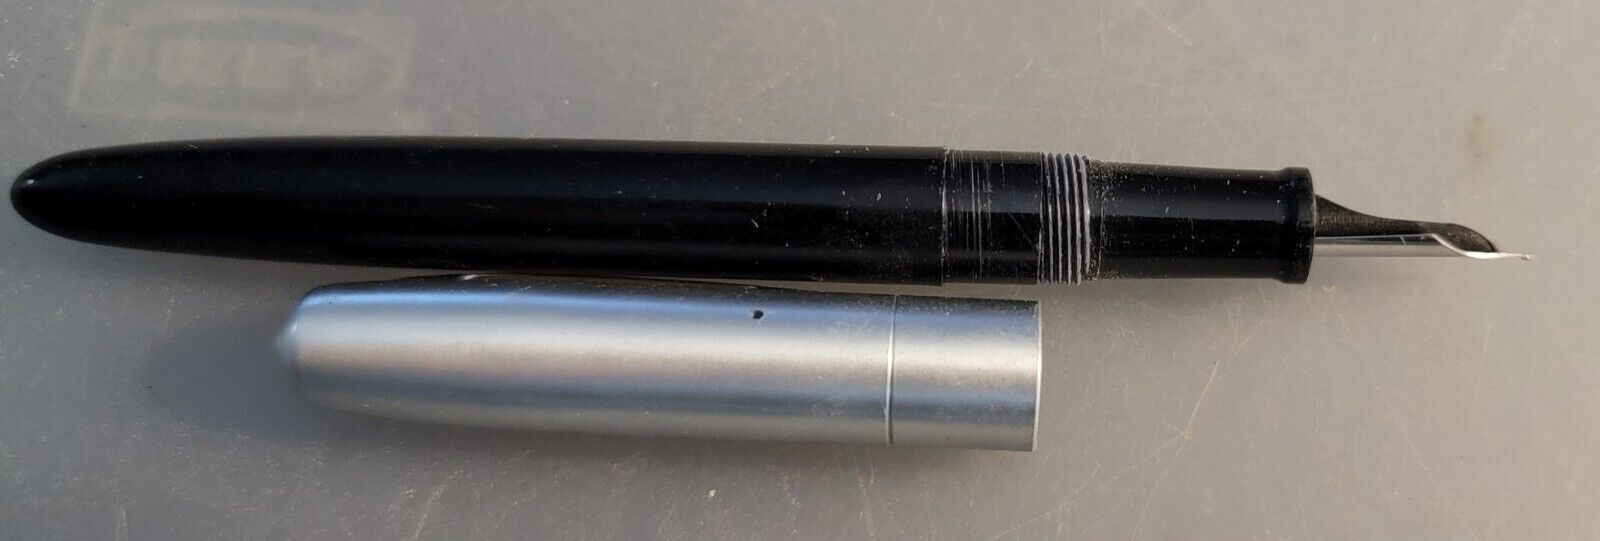 Vintage Wearever Fountain Pen Black and Silver